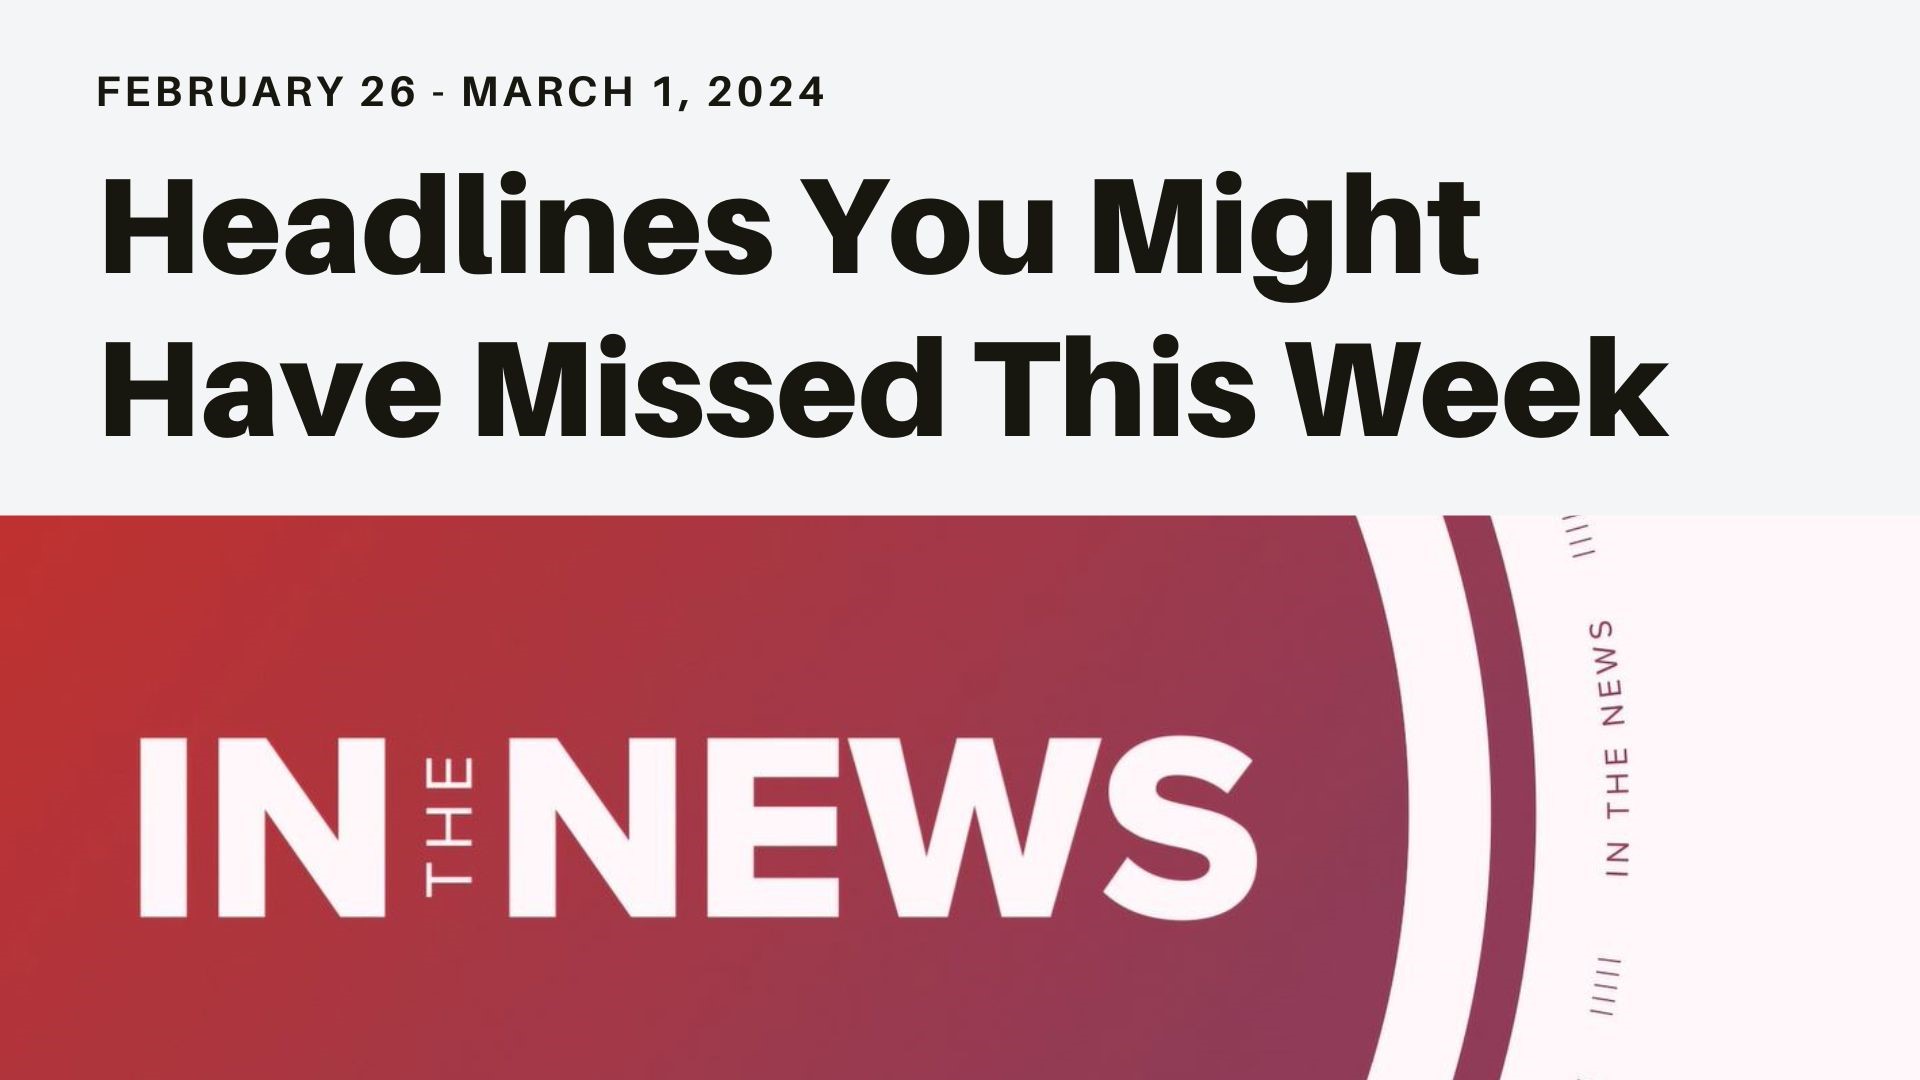 A look at the news might have missed this week from Pres. Biden and Trump visiting the U.S.-Mexico border to inflated grocery prices, SAG award winners and more.